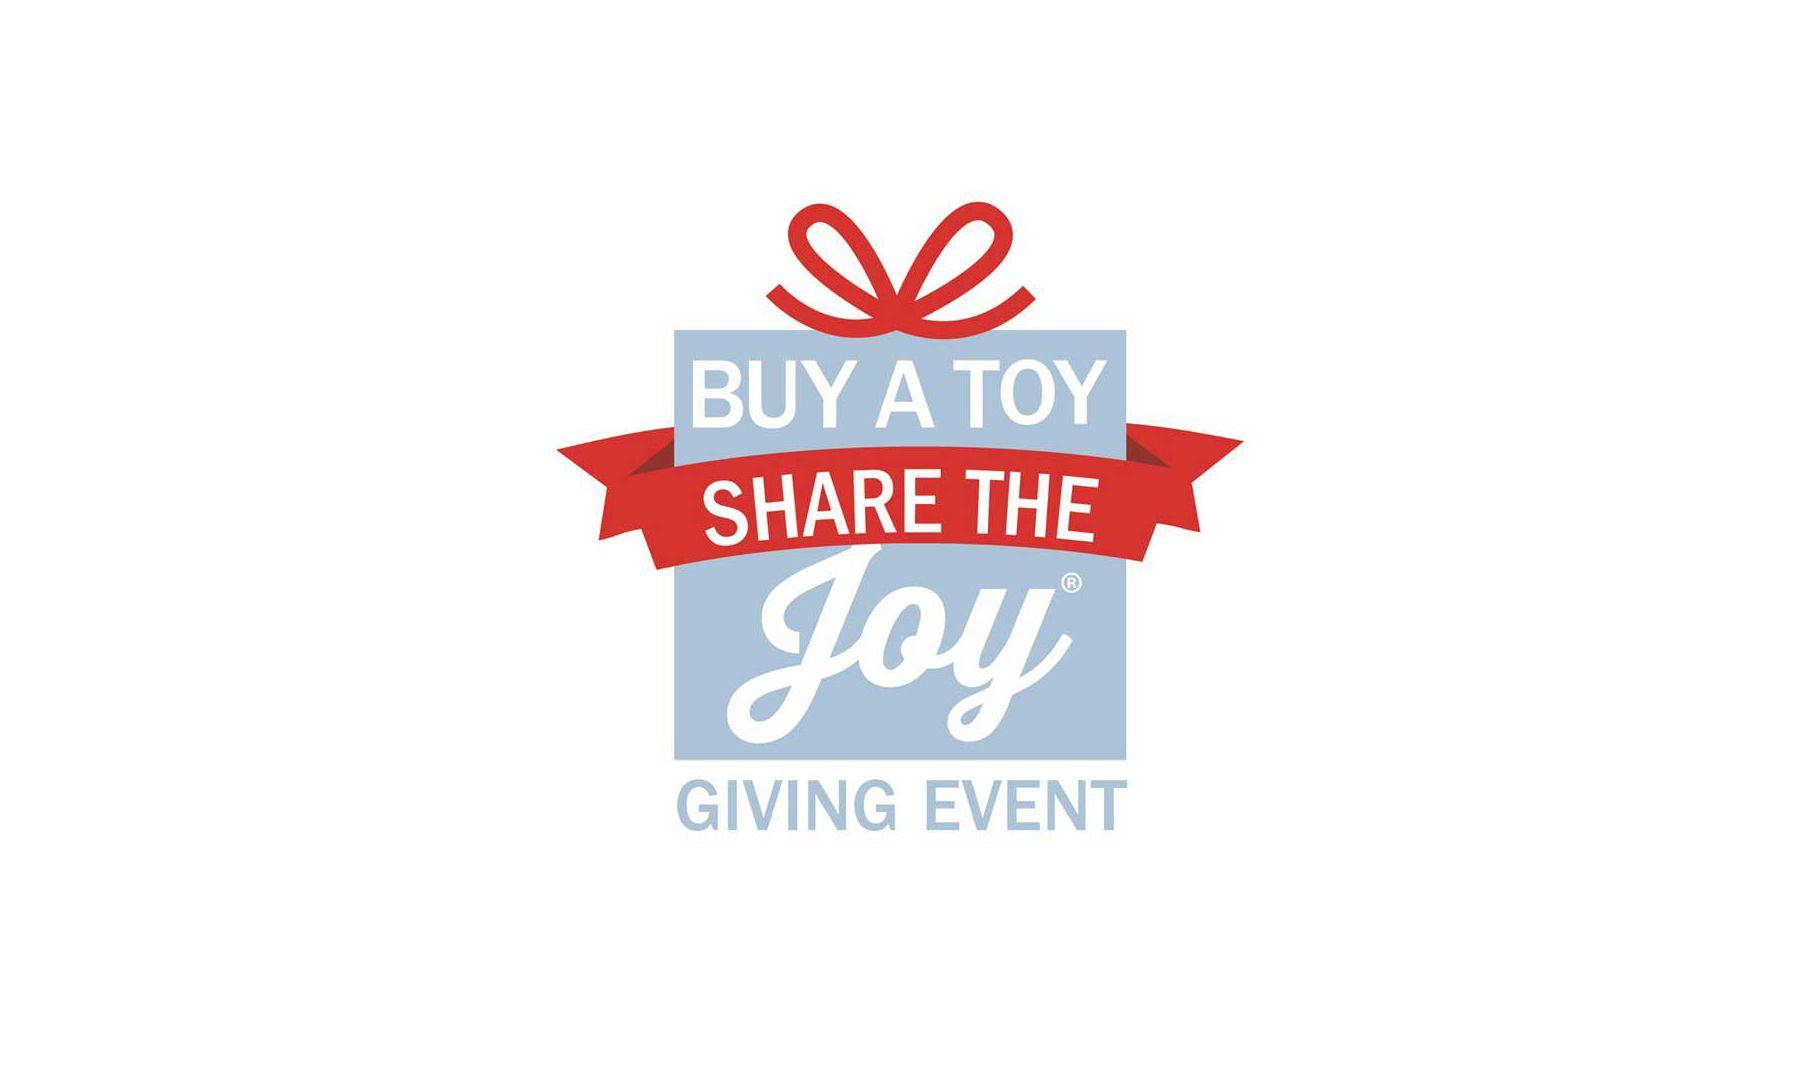 Meijer Brand Logo - Meijer To Donate Up To $400K Through 'Buy A Toy, Share The Joy'